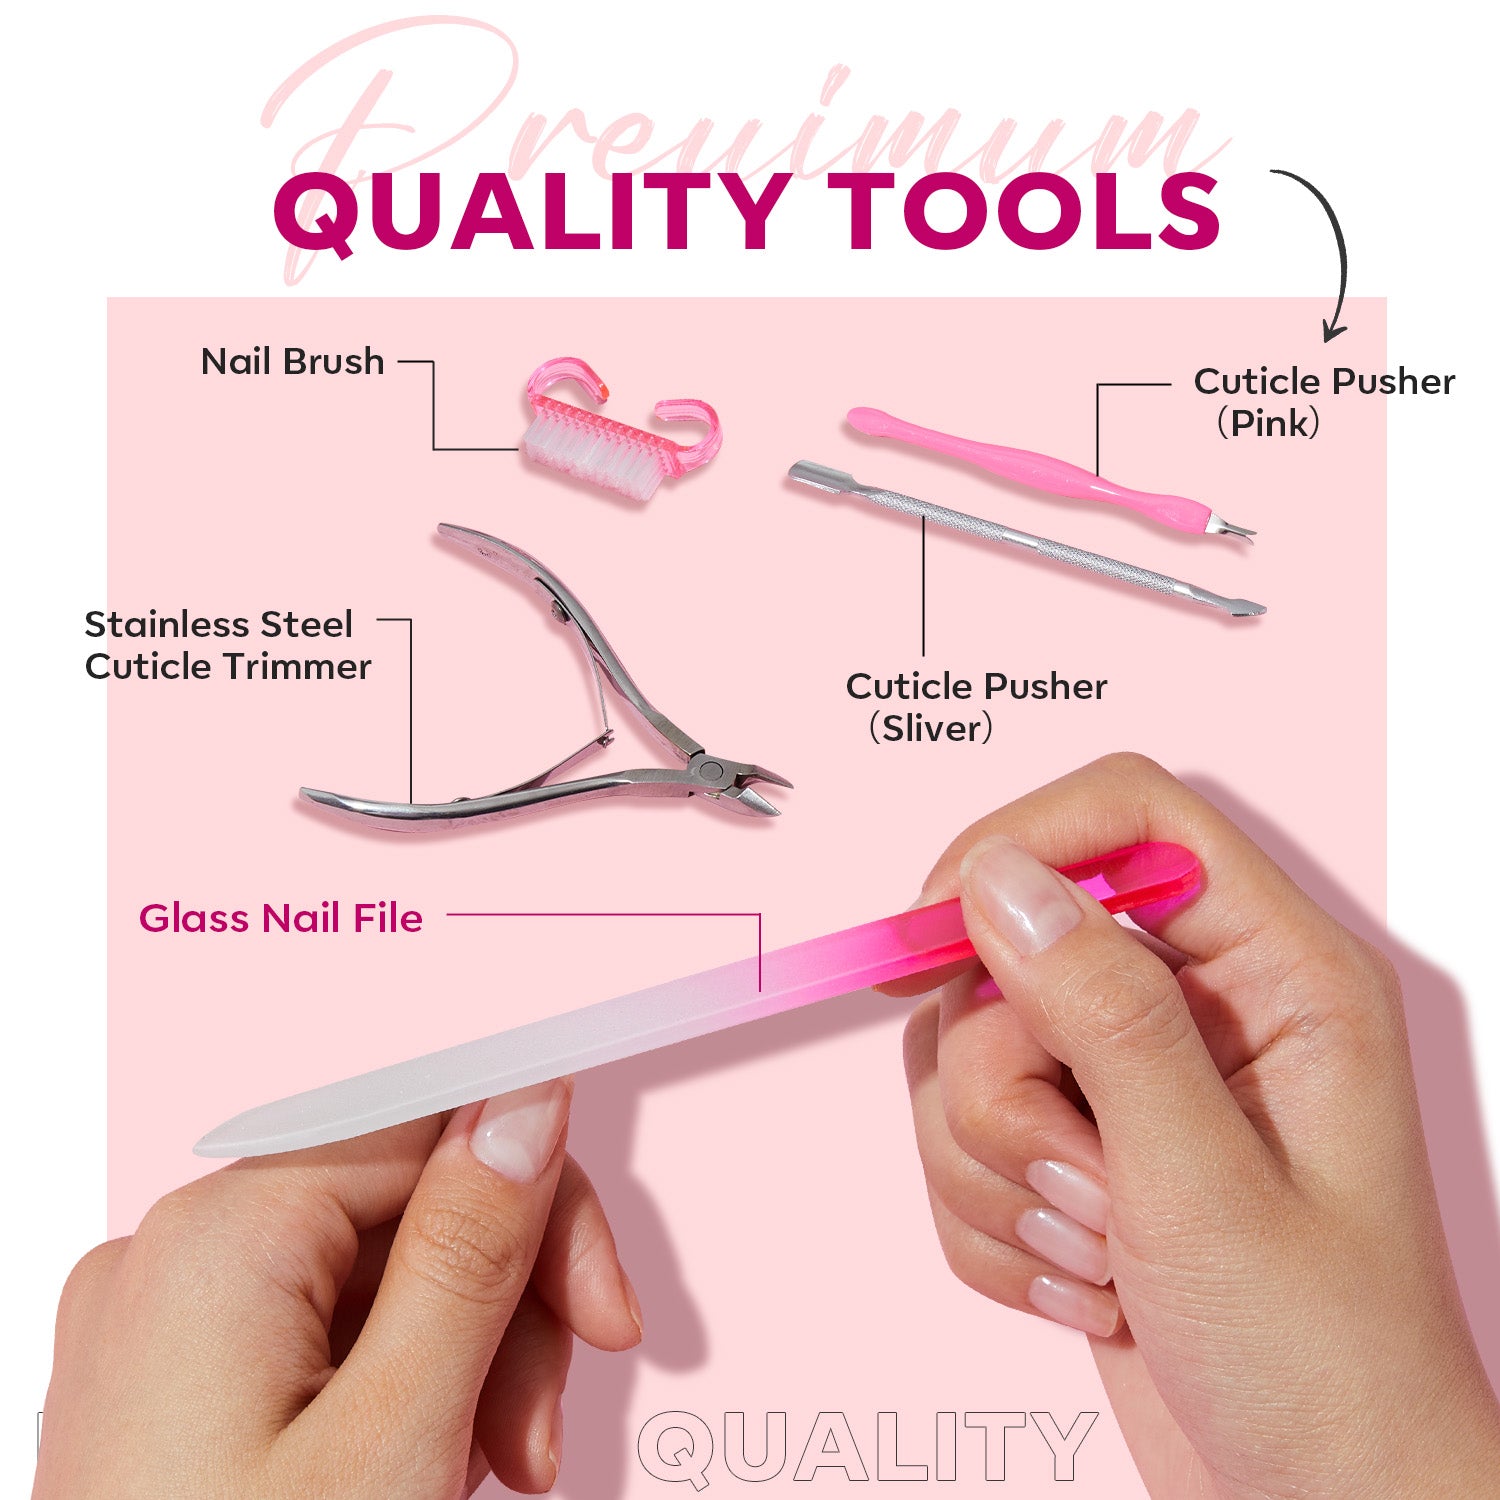 Modelones 8Pcs All-in-one Nail Care Kit【US ONLY】